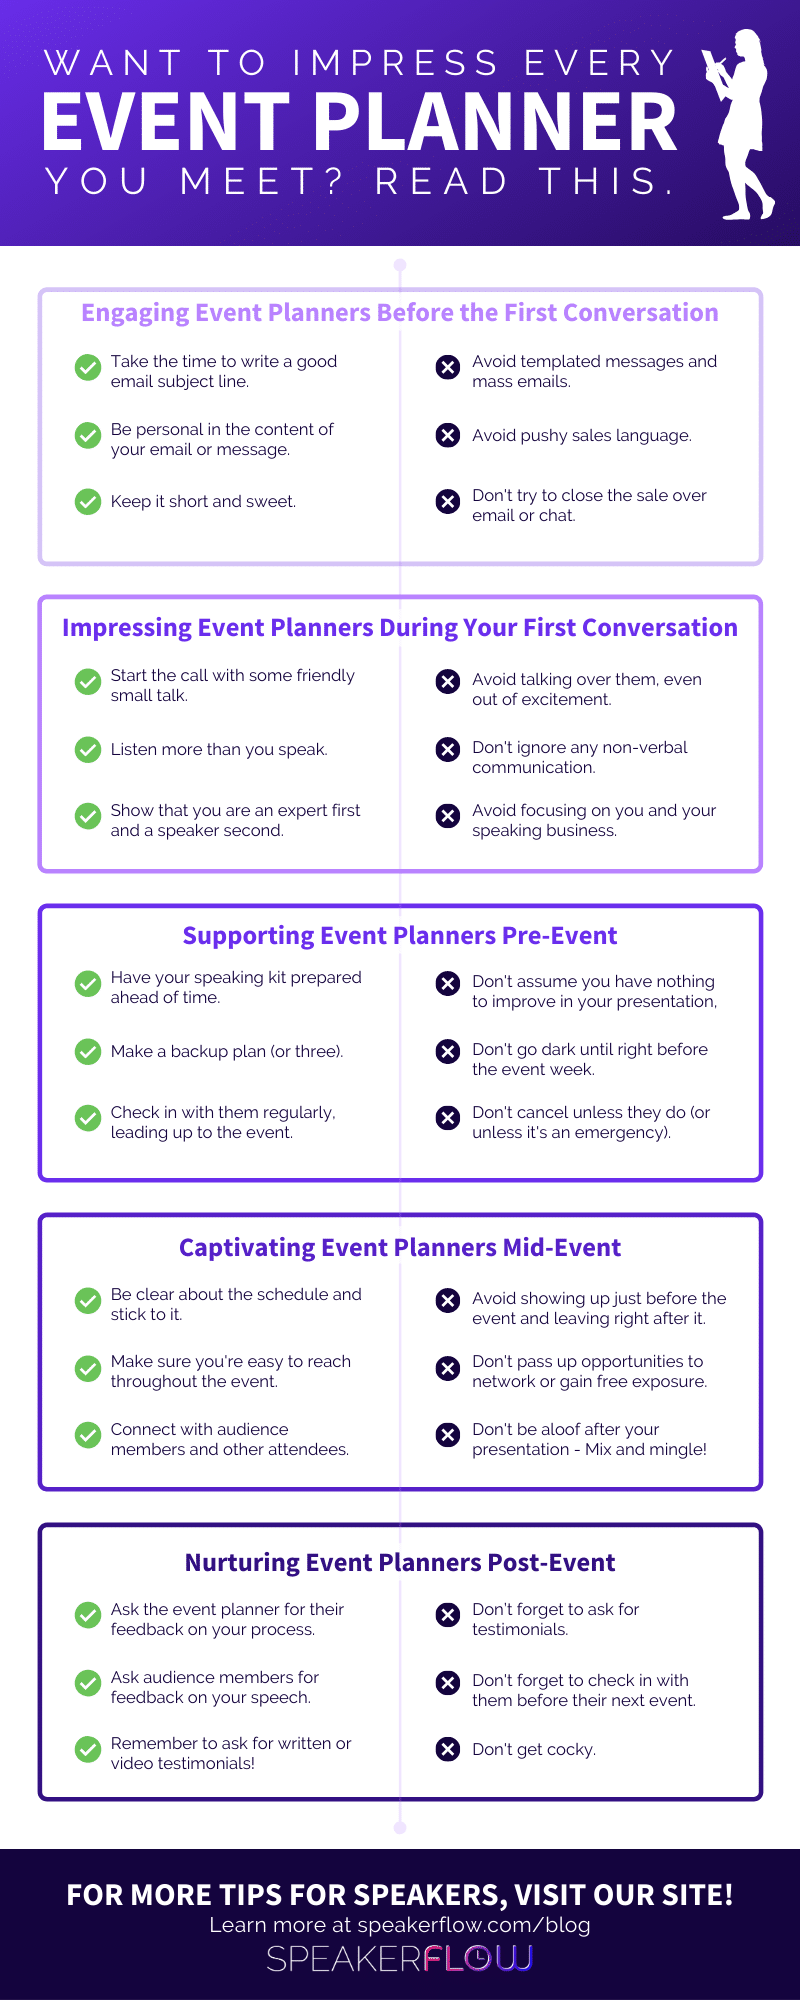 Infographic for Want To Impress Every Event Planner You Meet Read This - SpeakerFlow